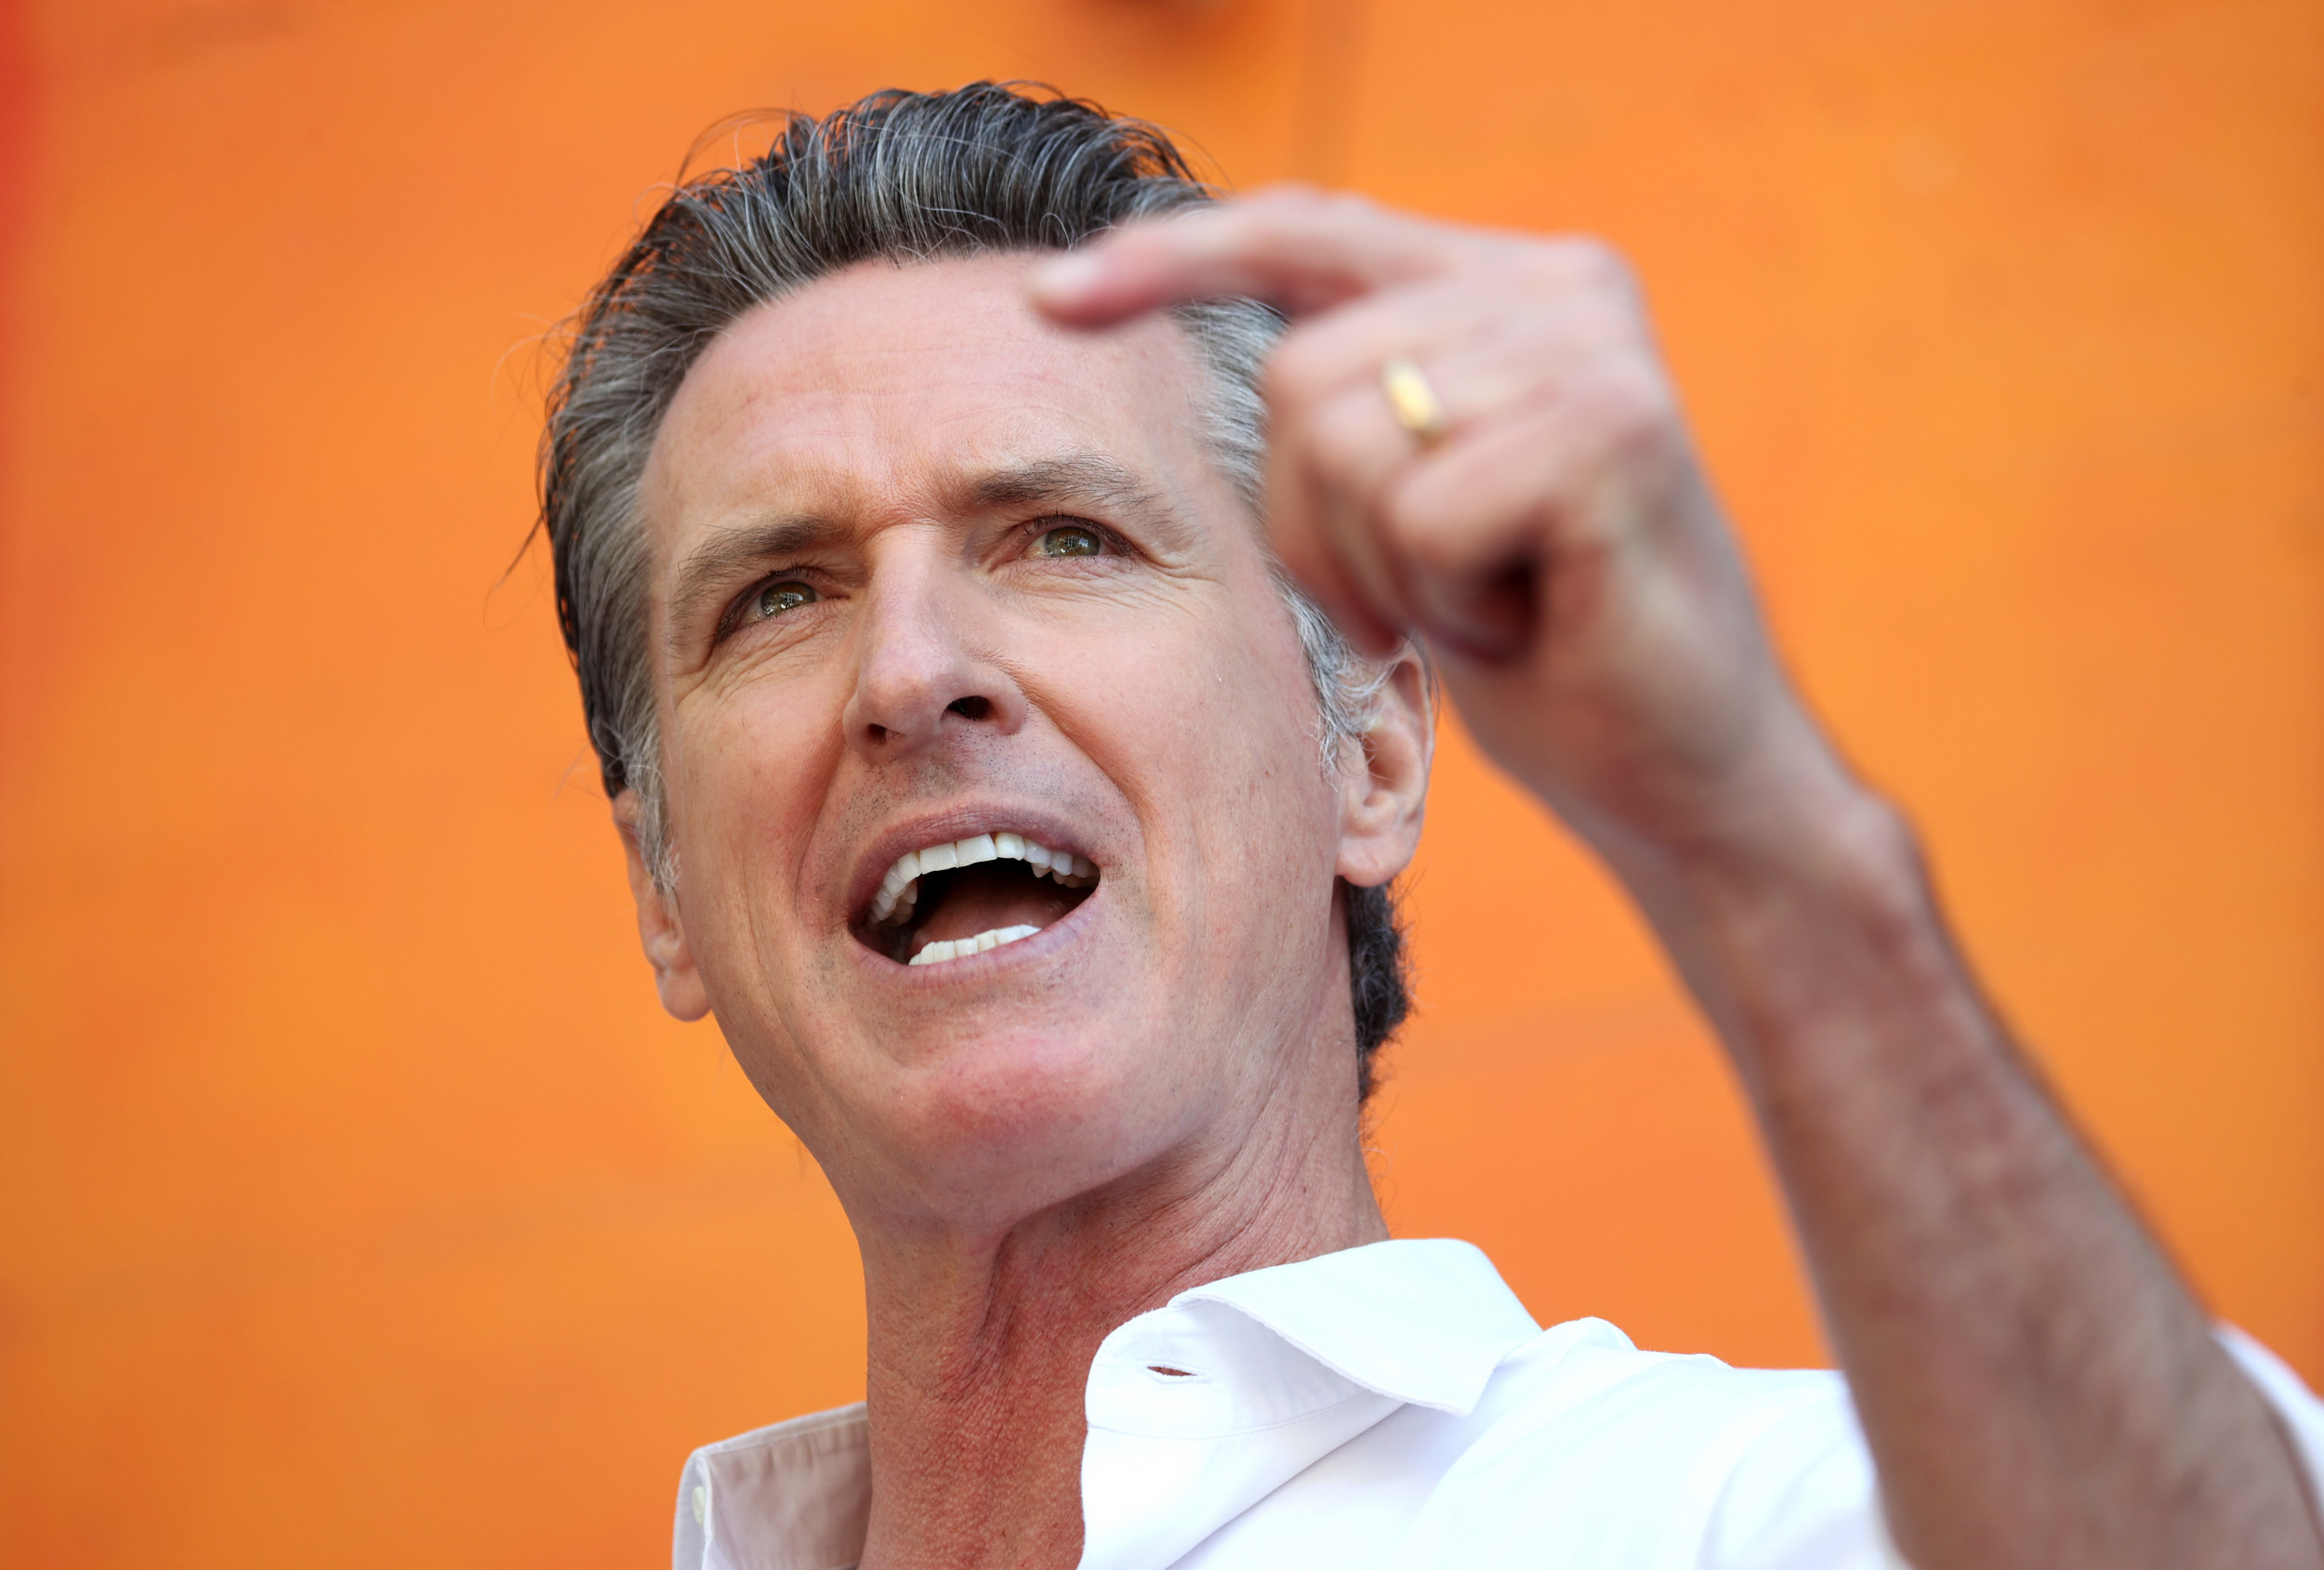 Could Gavin Newsom Beat Trump in 2024? His California Status Could Be